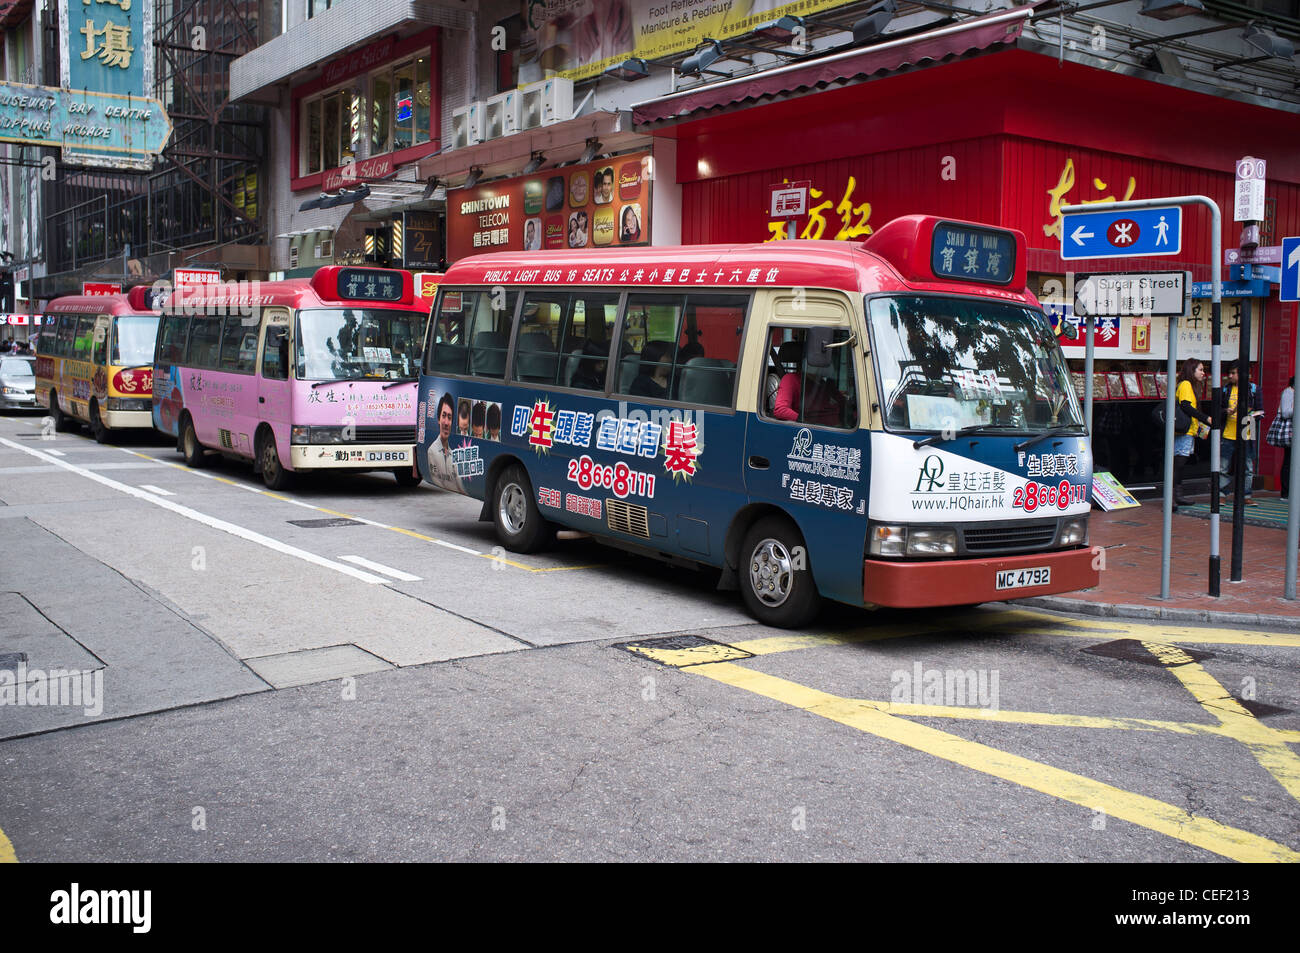 dh Public light buses CAUSEWAY BAY HONG KONG Red minibus with chinese calligraphy adverts mini bus asian transport island Stock Photo